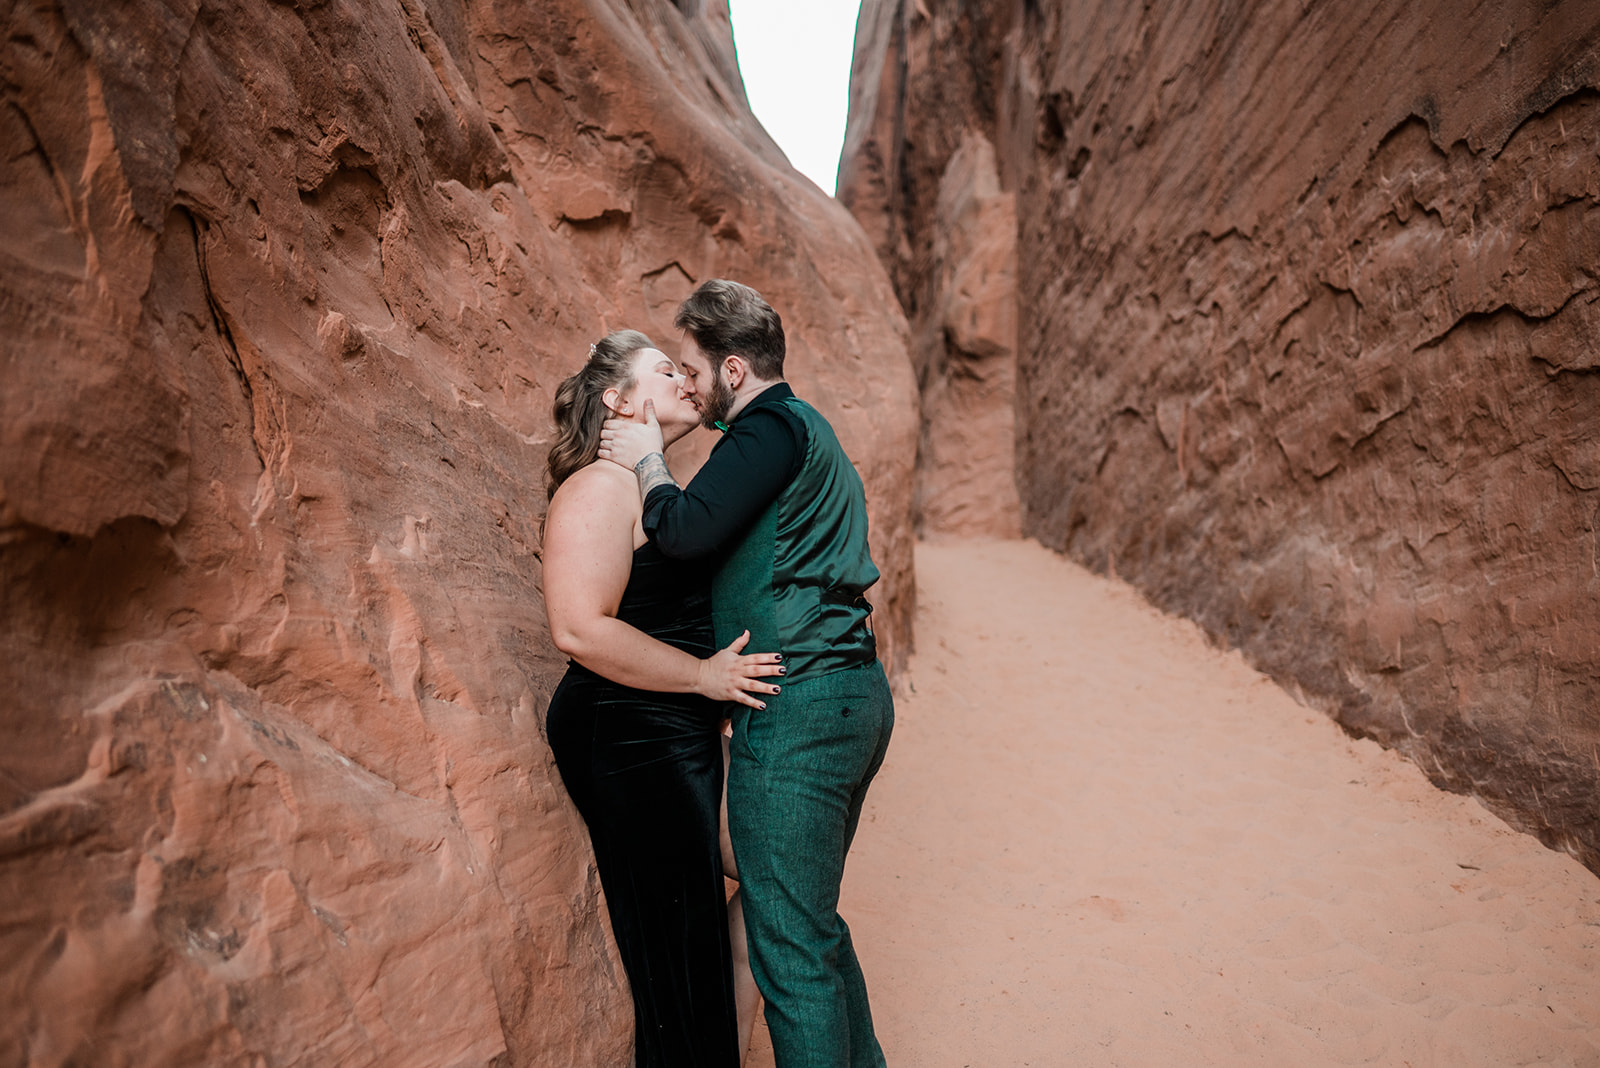 Shandra & Cody | Engagement Photos at Arches National Park